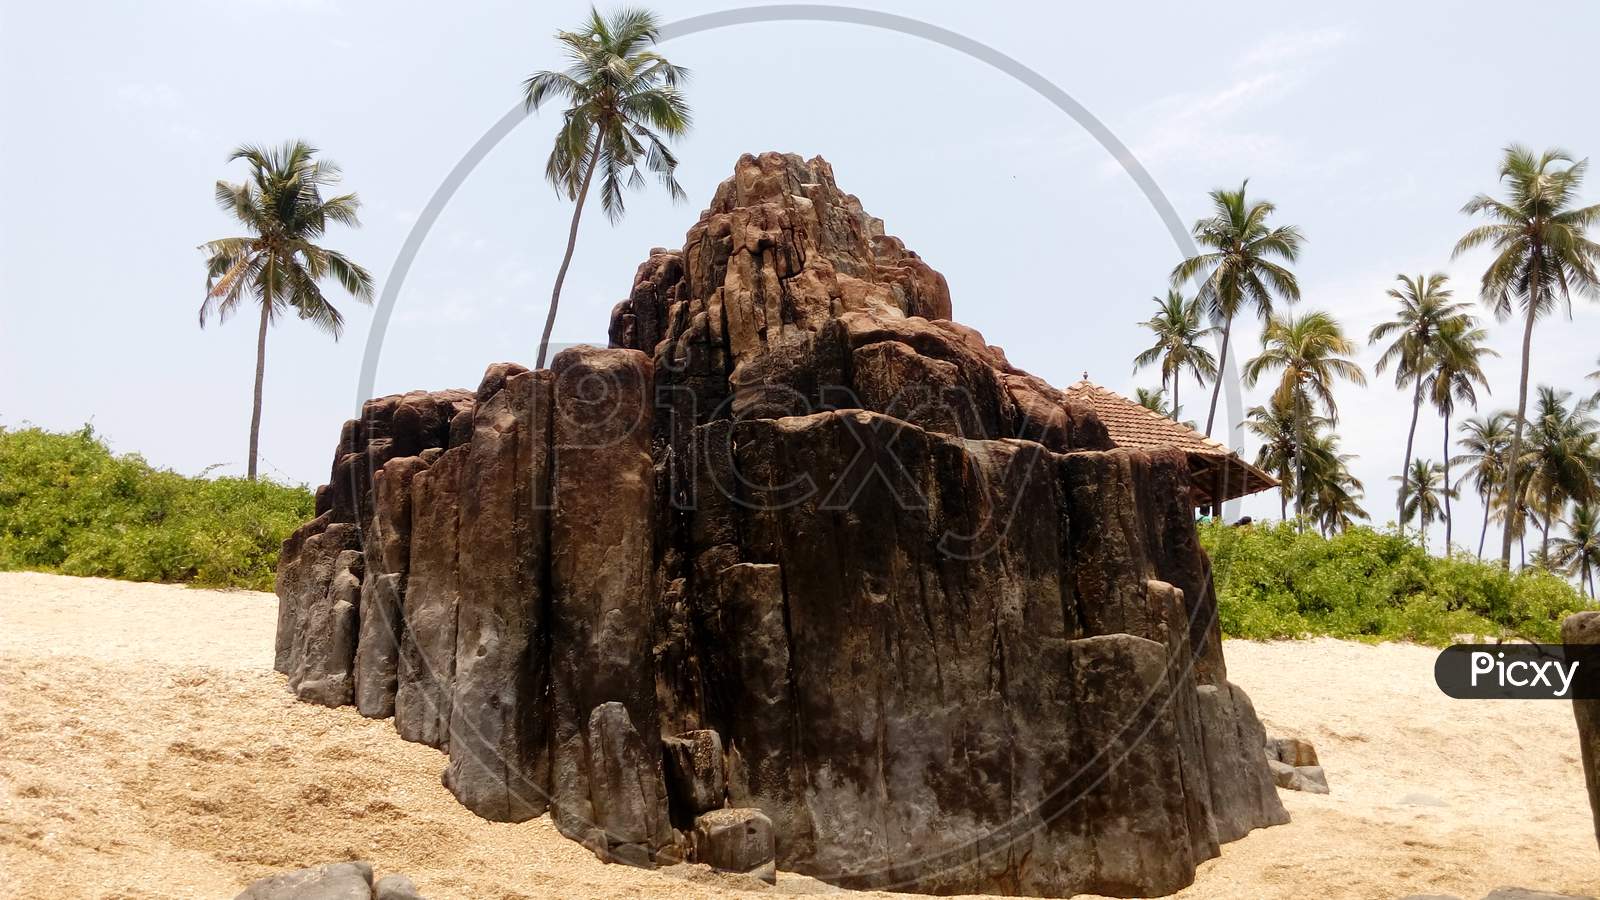 Columnar rhyolite Lava  St.Marys Island Malpe, one of the four geological monuments in Karnataka state, one of the 32 National Geological Monuments of India declared by the Geological Survey of India